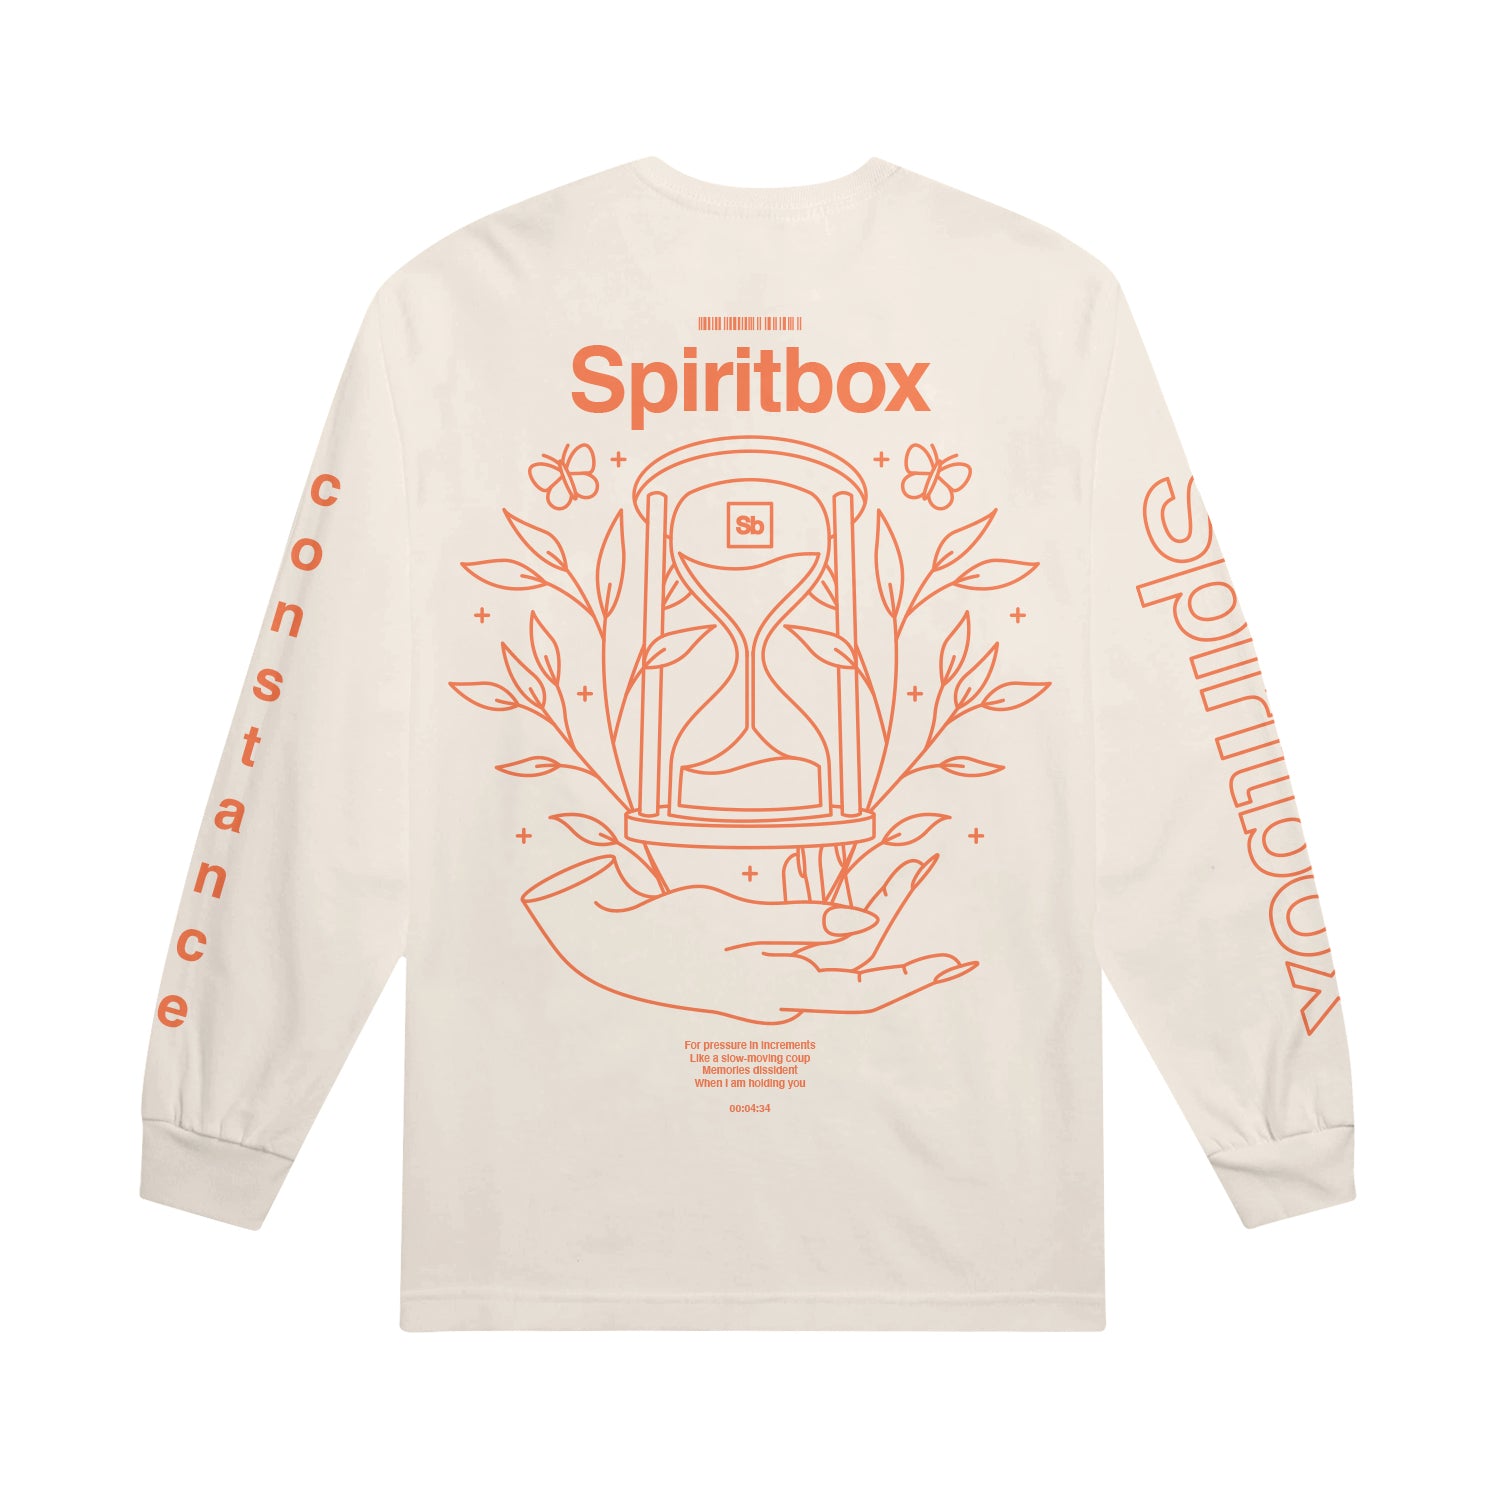 off white longsleeve against white background. across the shoulders in orange text reads "spiritbox". below this is an orange outlined graphic with no fill. it is an hourglass with a hand underneath it, and flowers and butterflies next to it. the left sleeve says "constance" in solid orange text, the right sleeve says "spiritbox" in an orange outline text. 